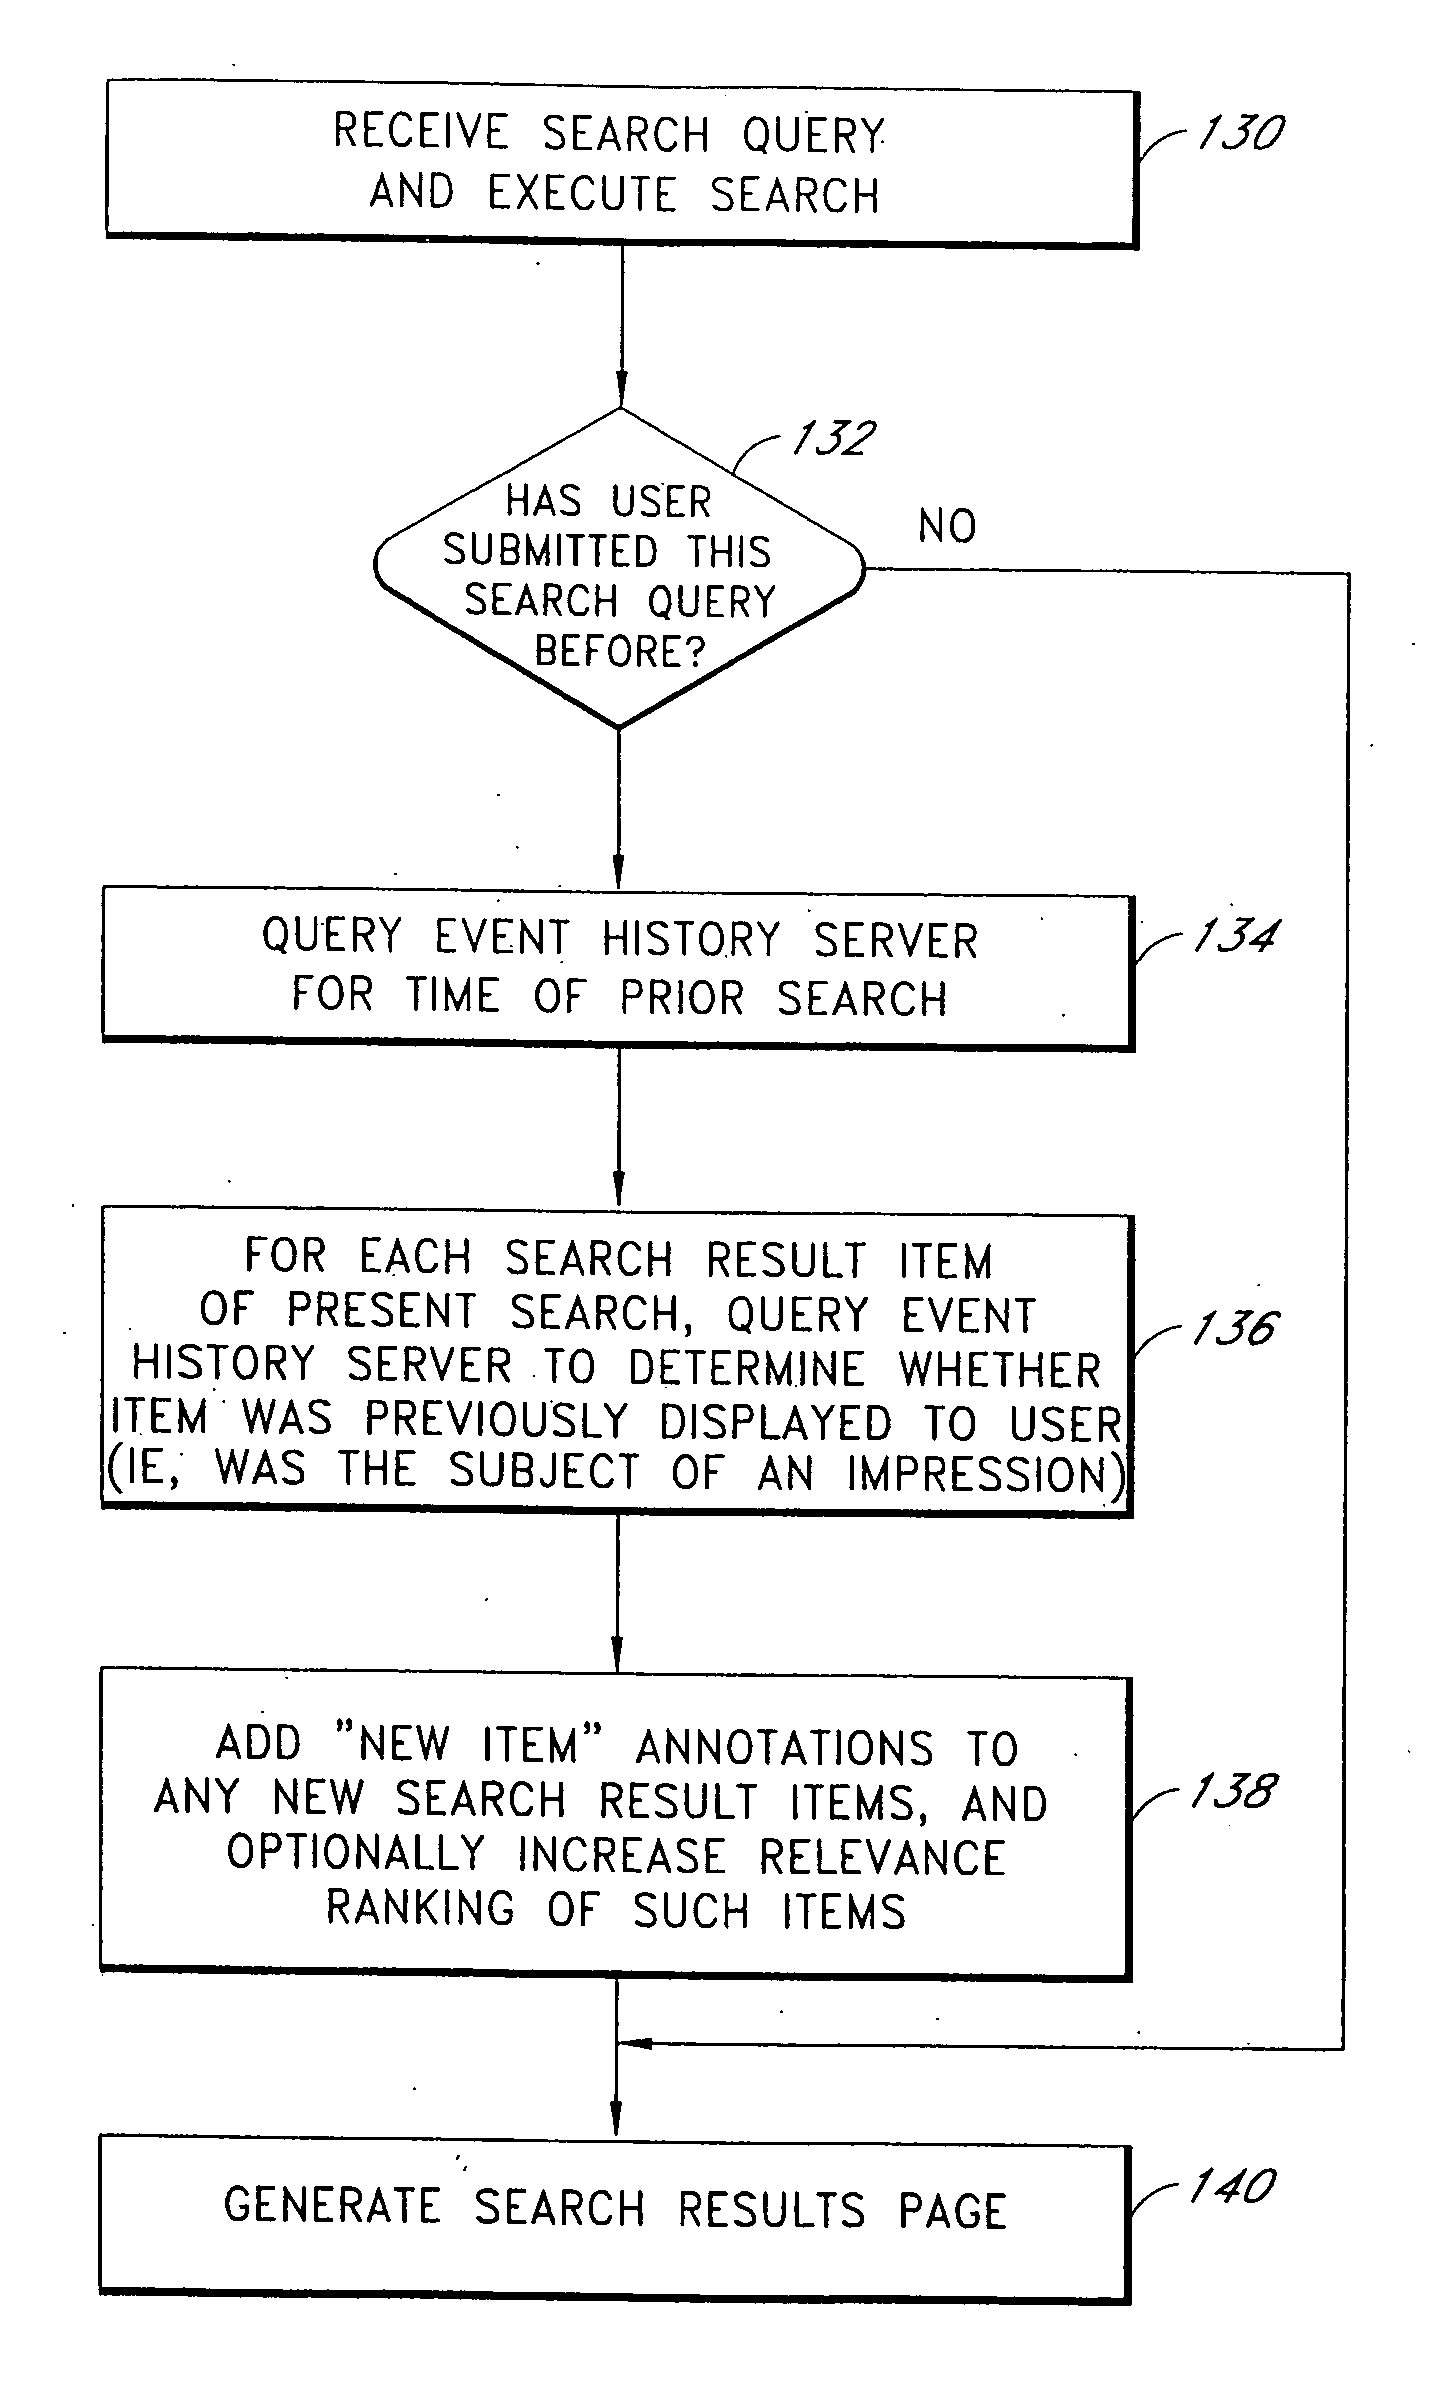 Server architecture and methods for persistently storing and serving event data